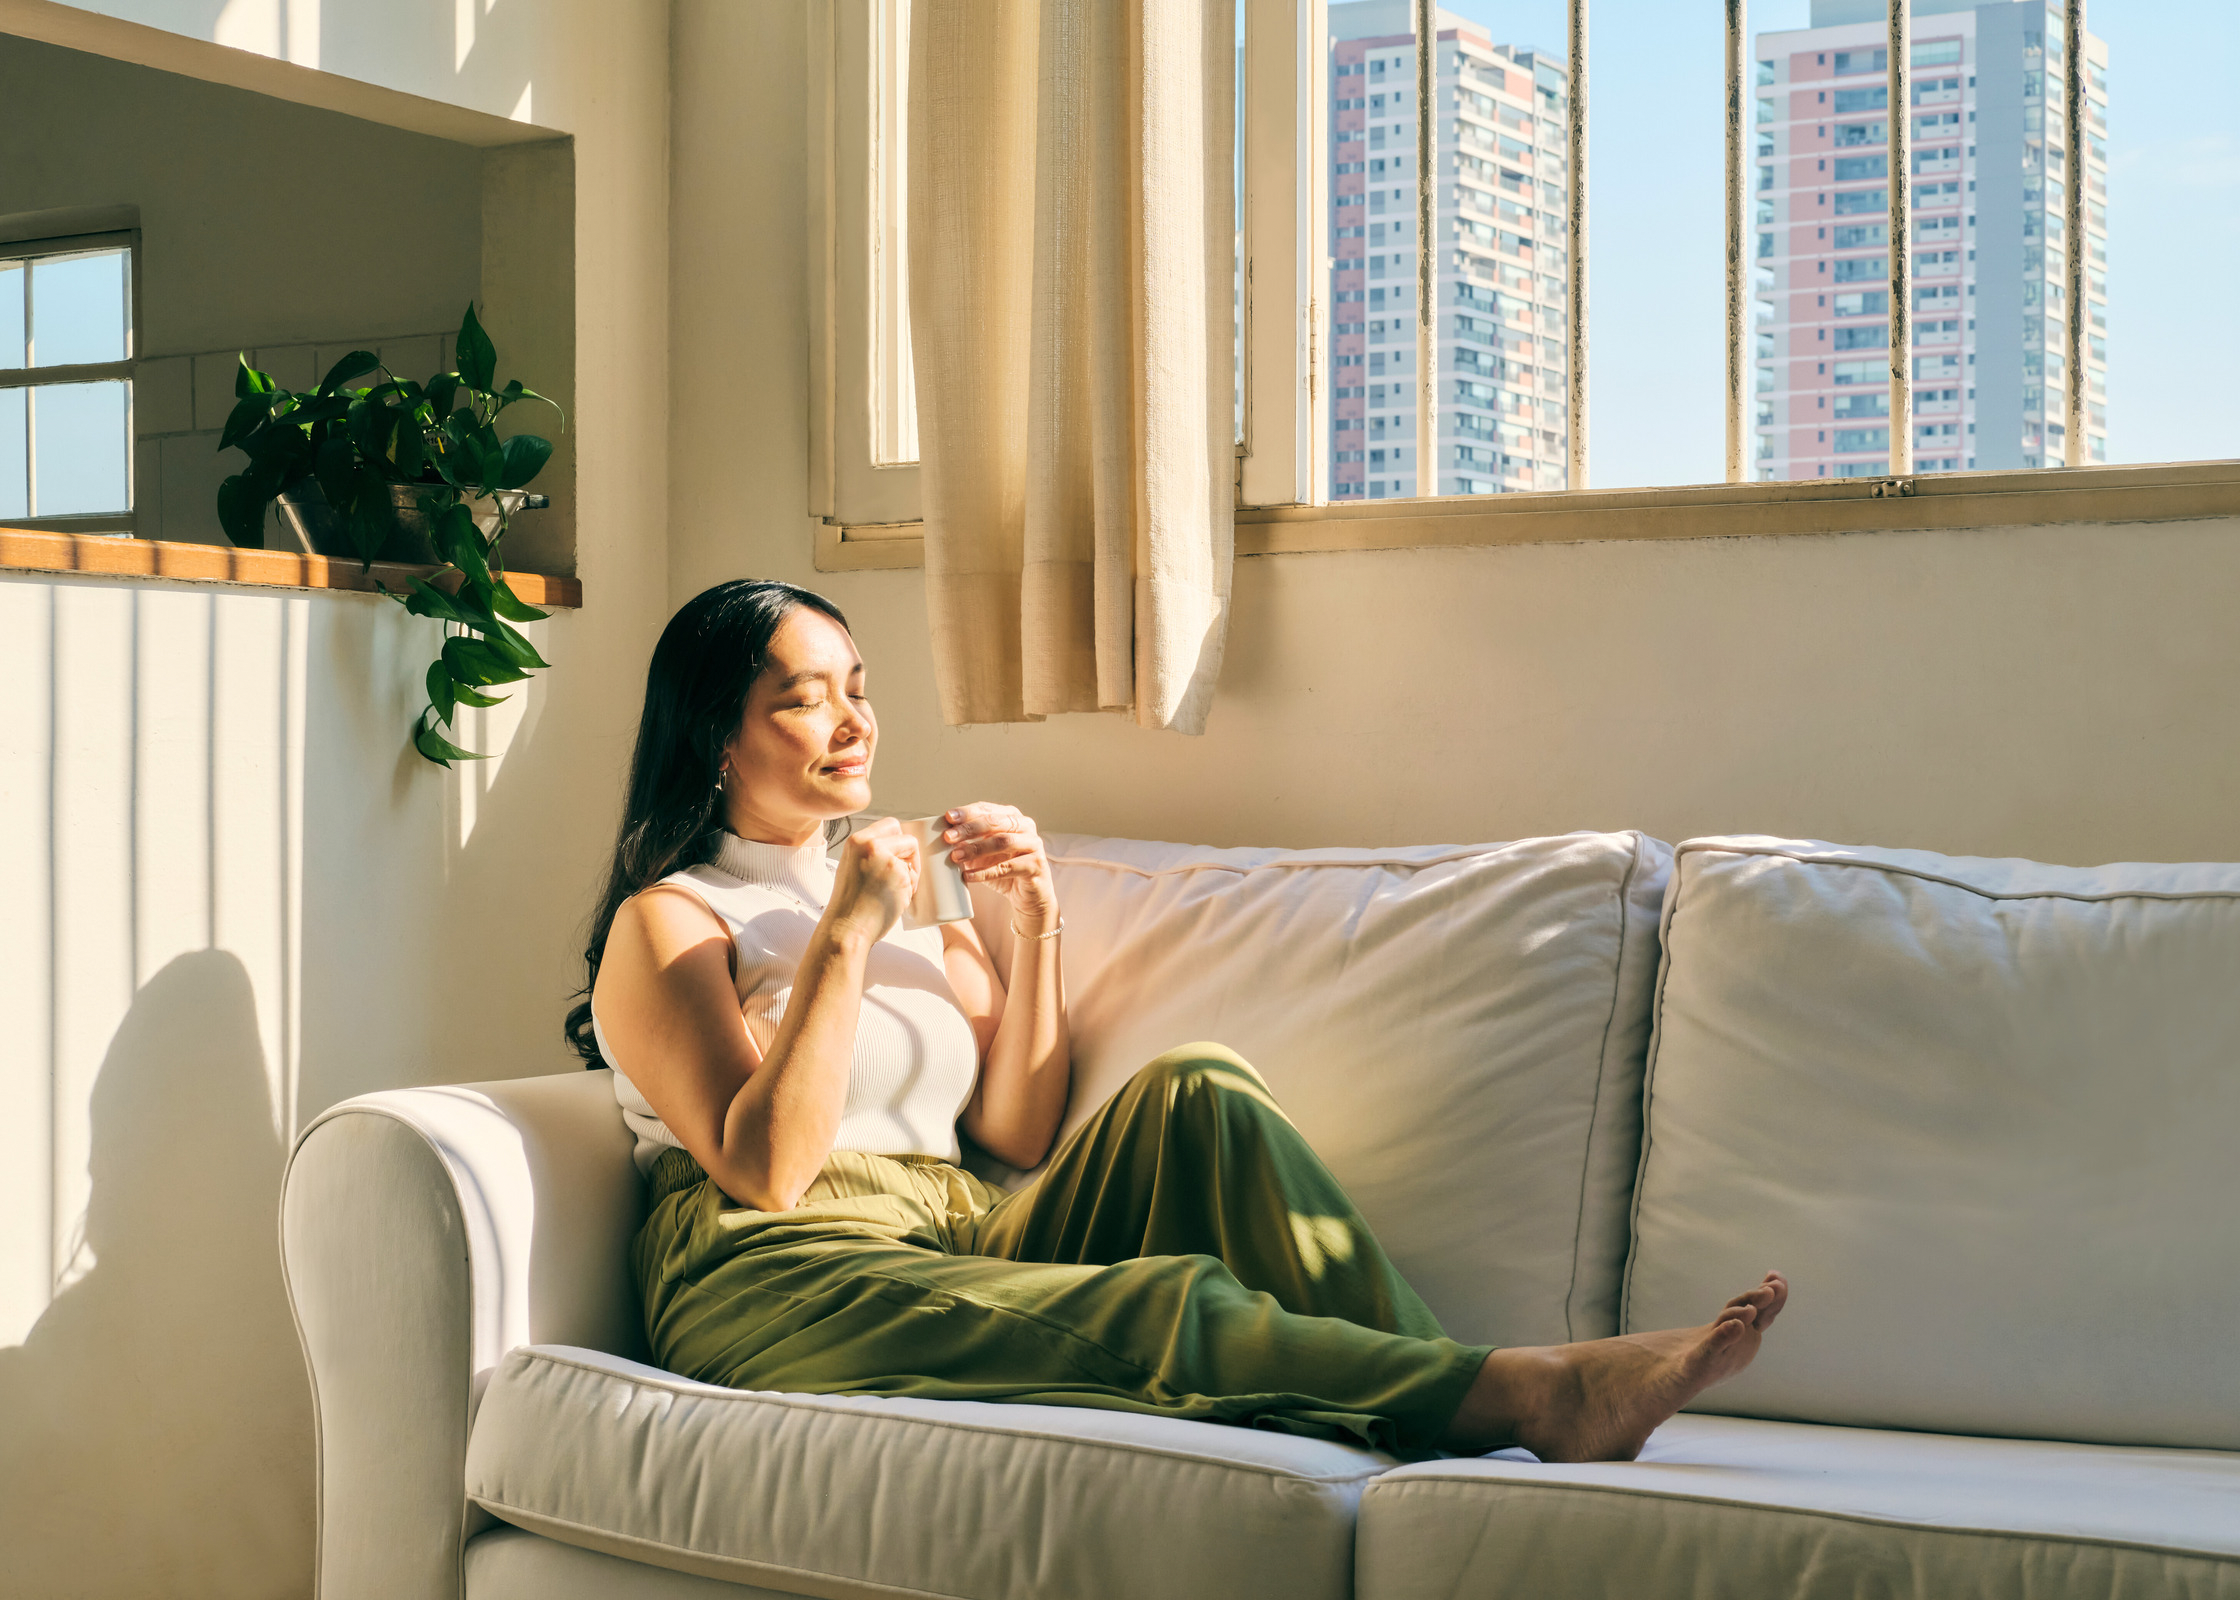 How To Relax After a Stressful Day: 17 Ways To Unwind And Decompress